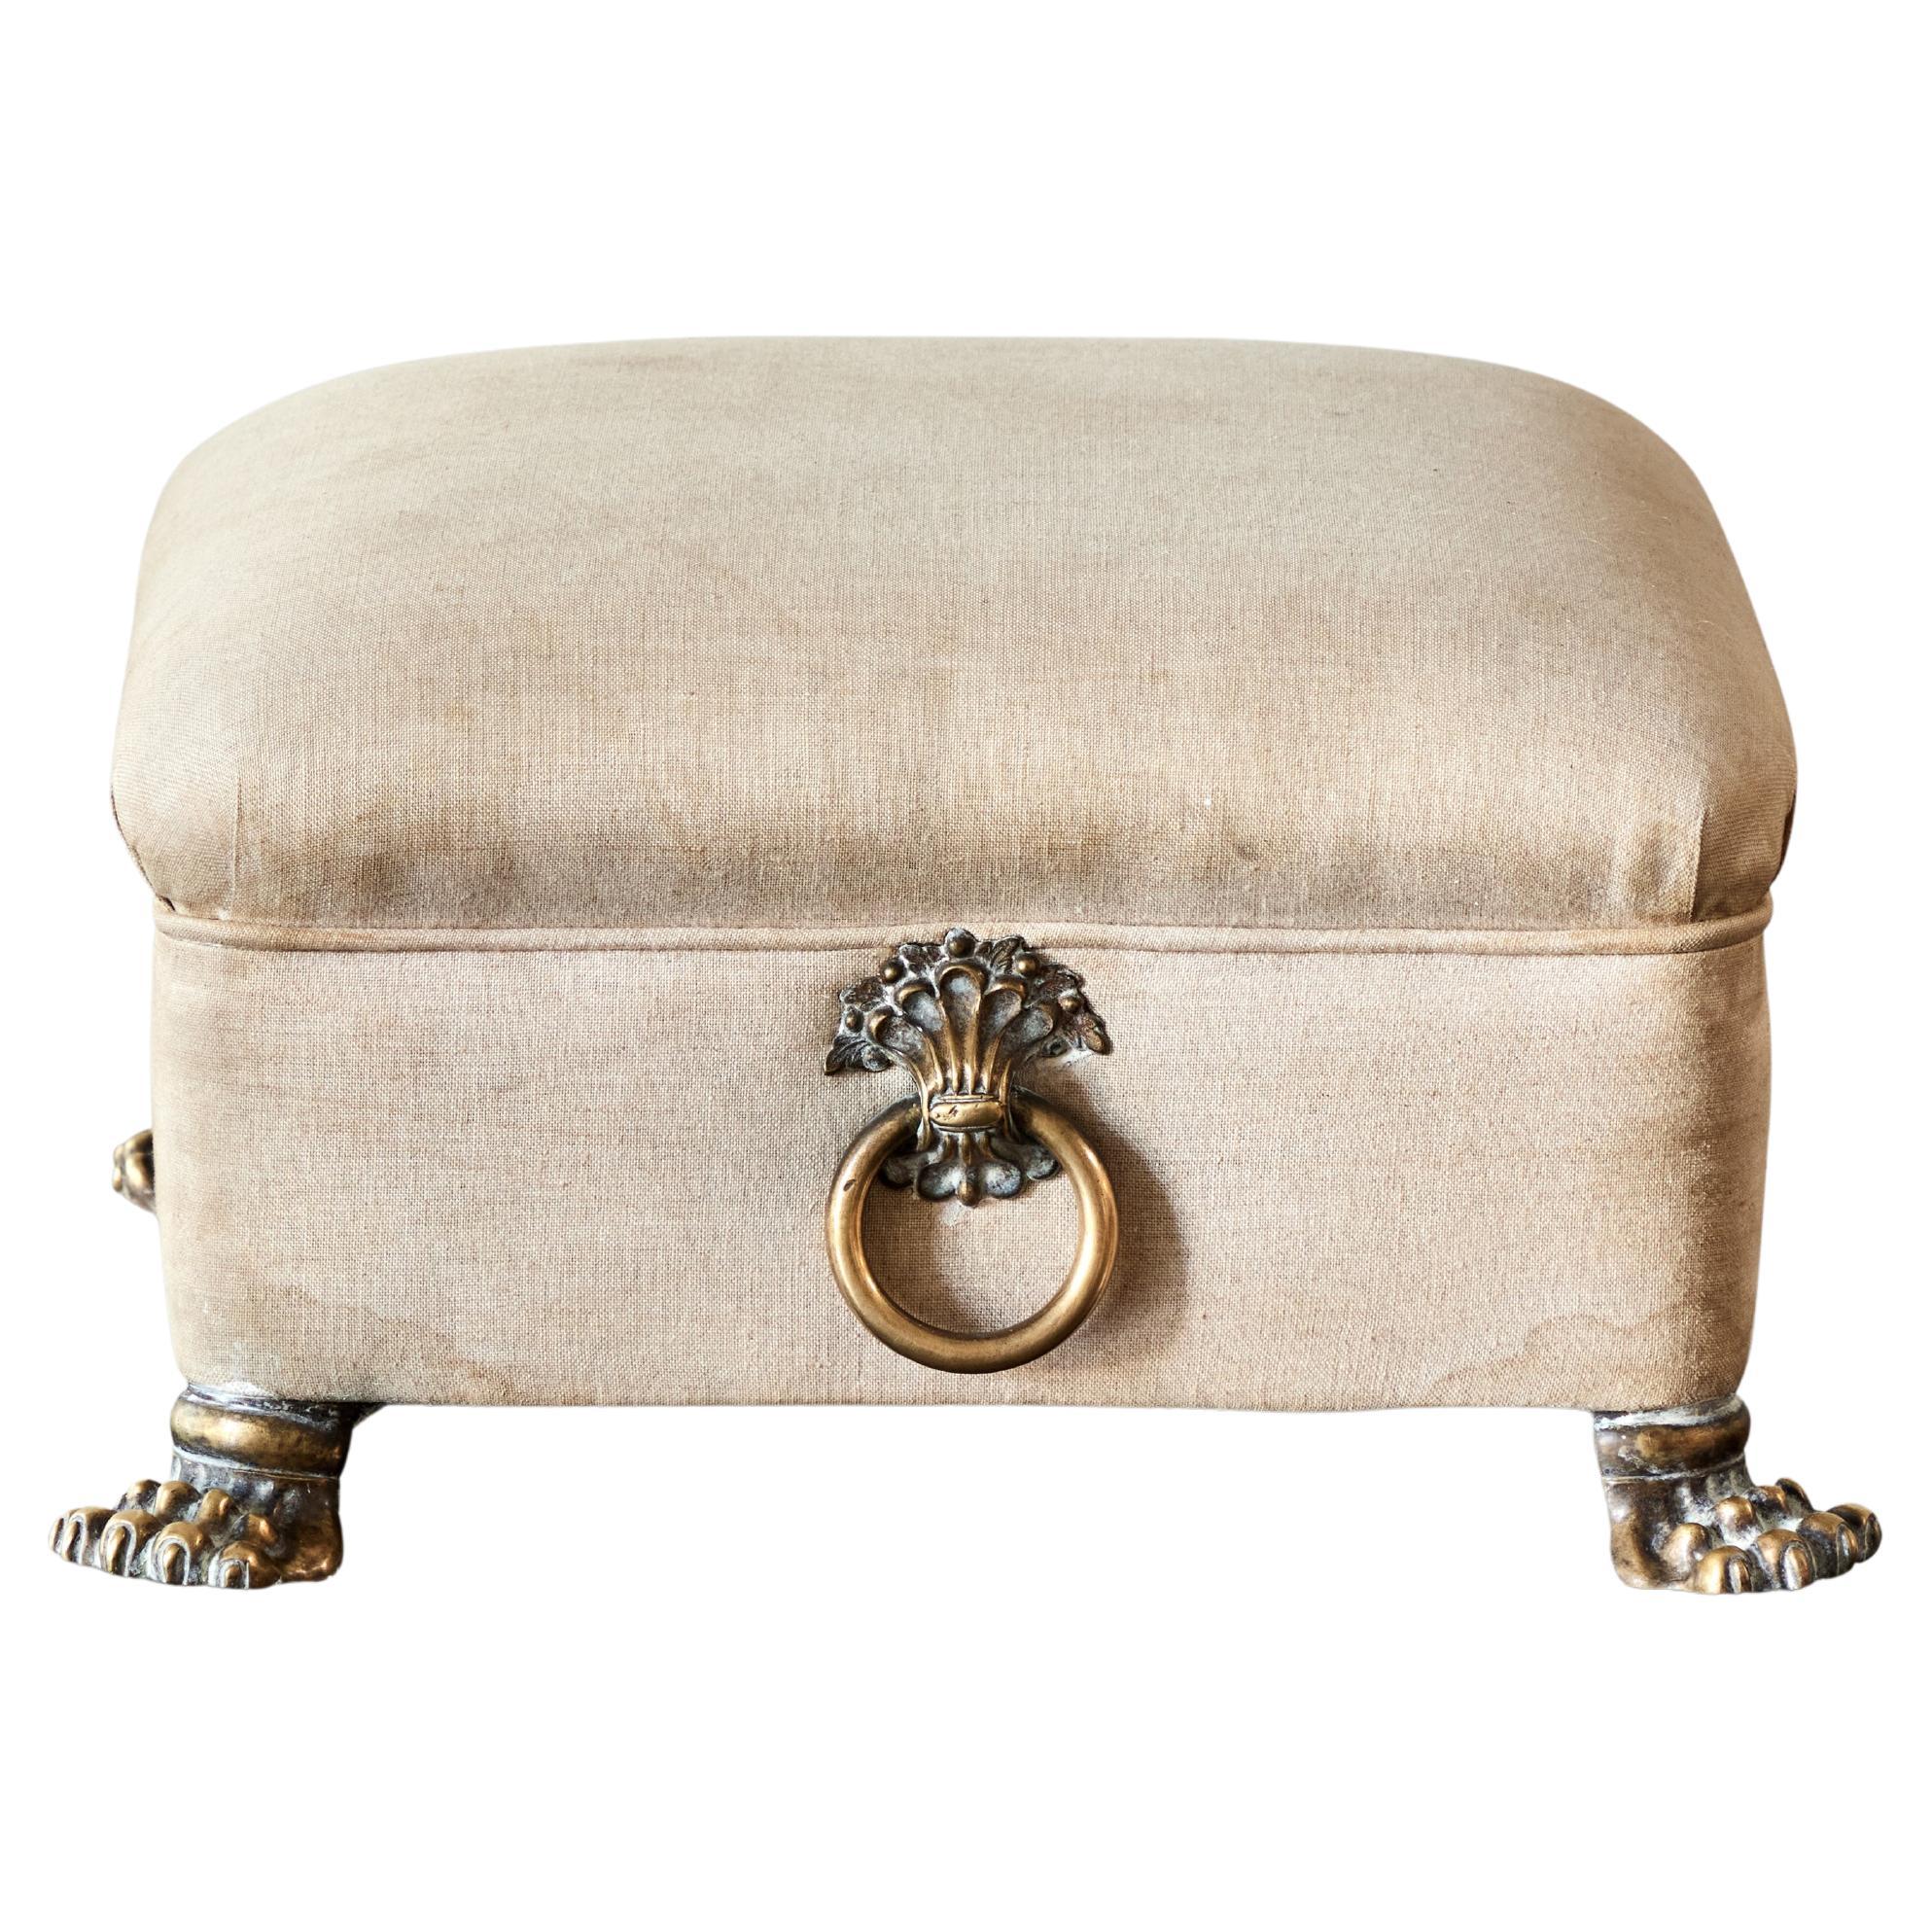 William IV Era Clawfoot Upholstered Footstool For Sale